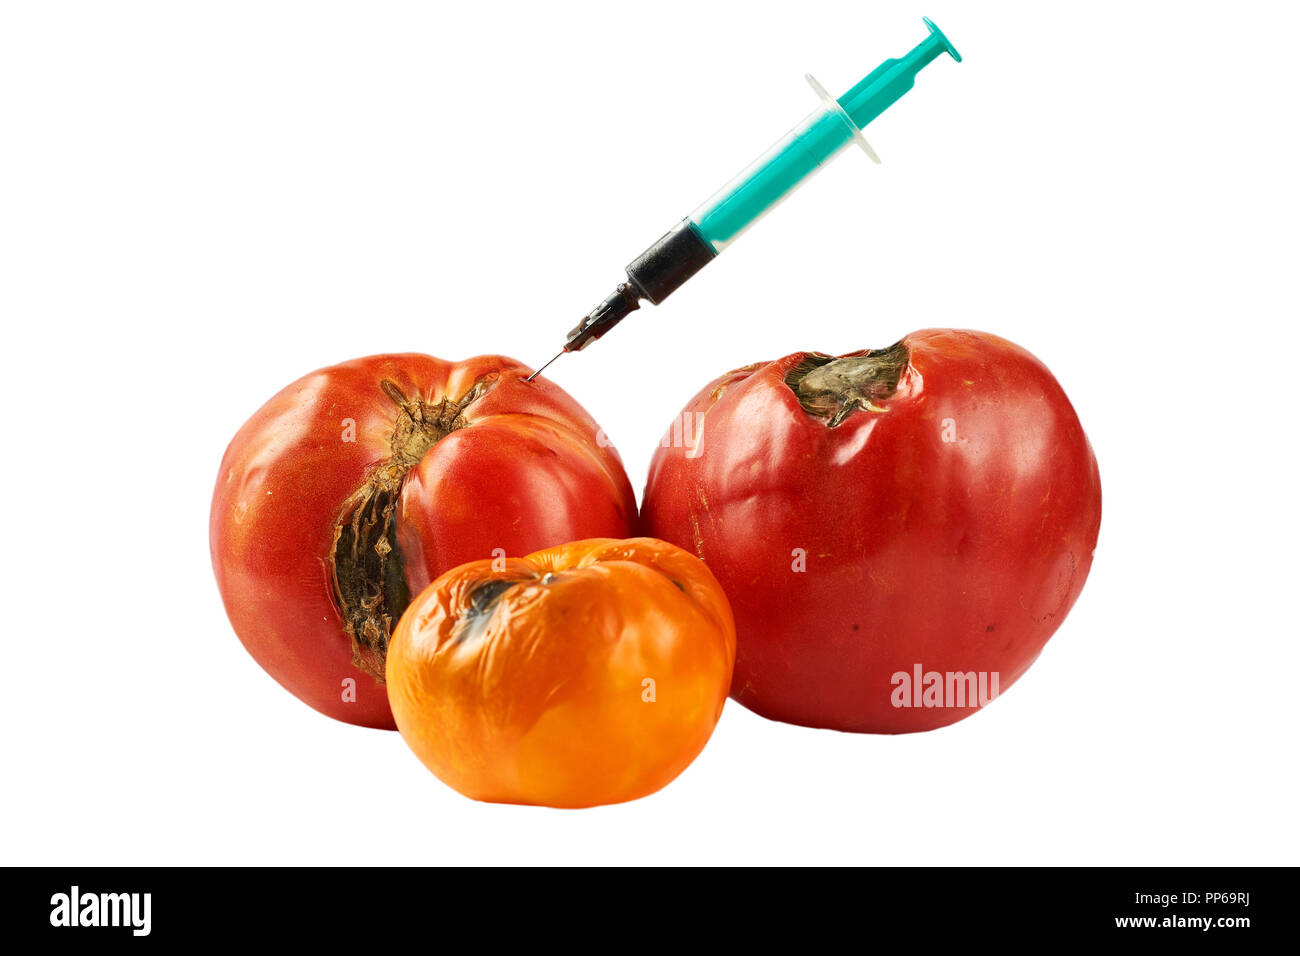 Spoiled, rotten three tomatoes with stuck syringe isolated on white background. Stock Photo